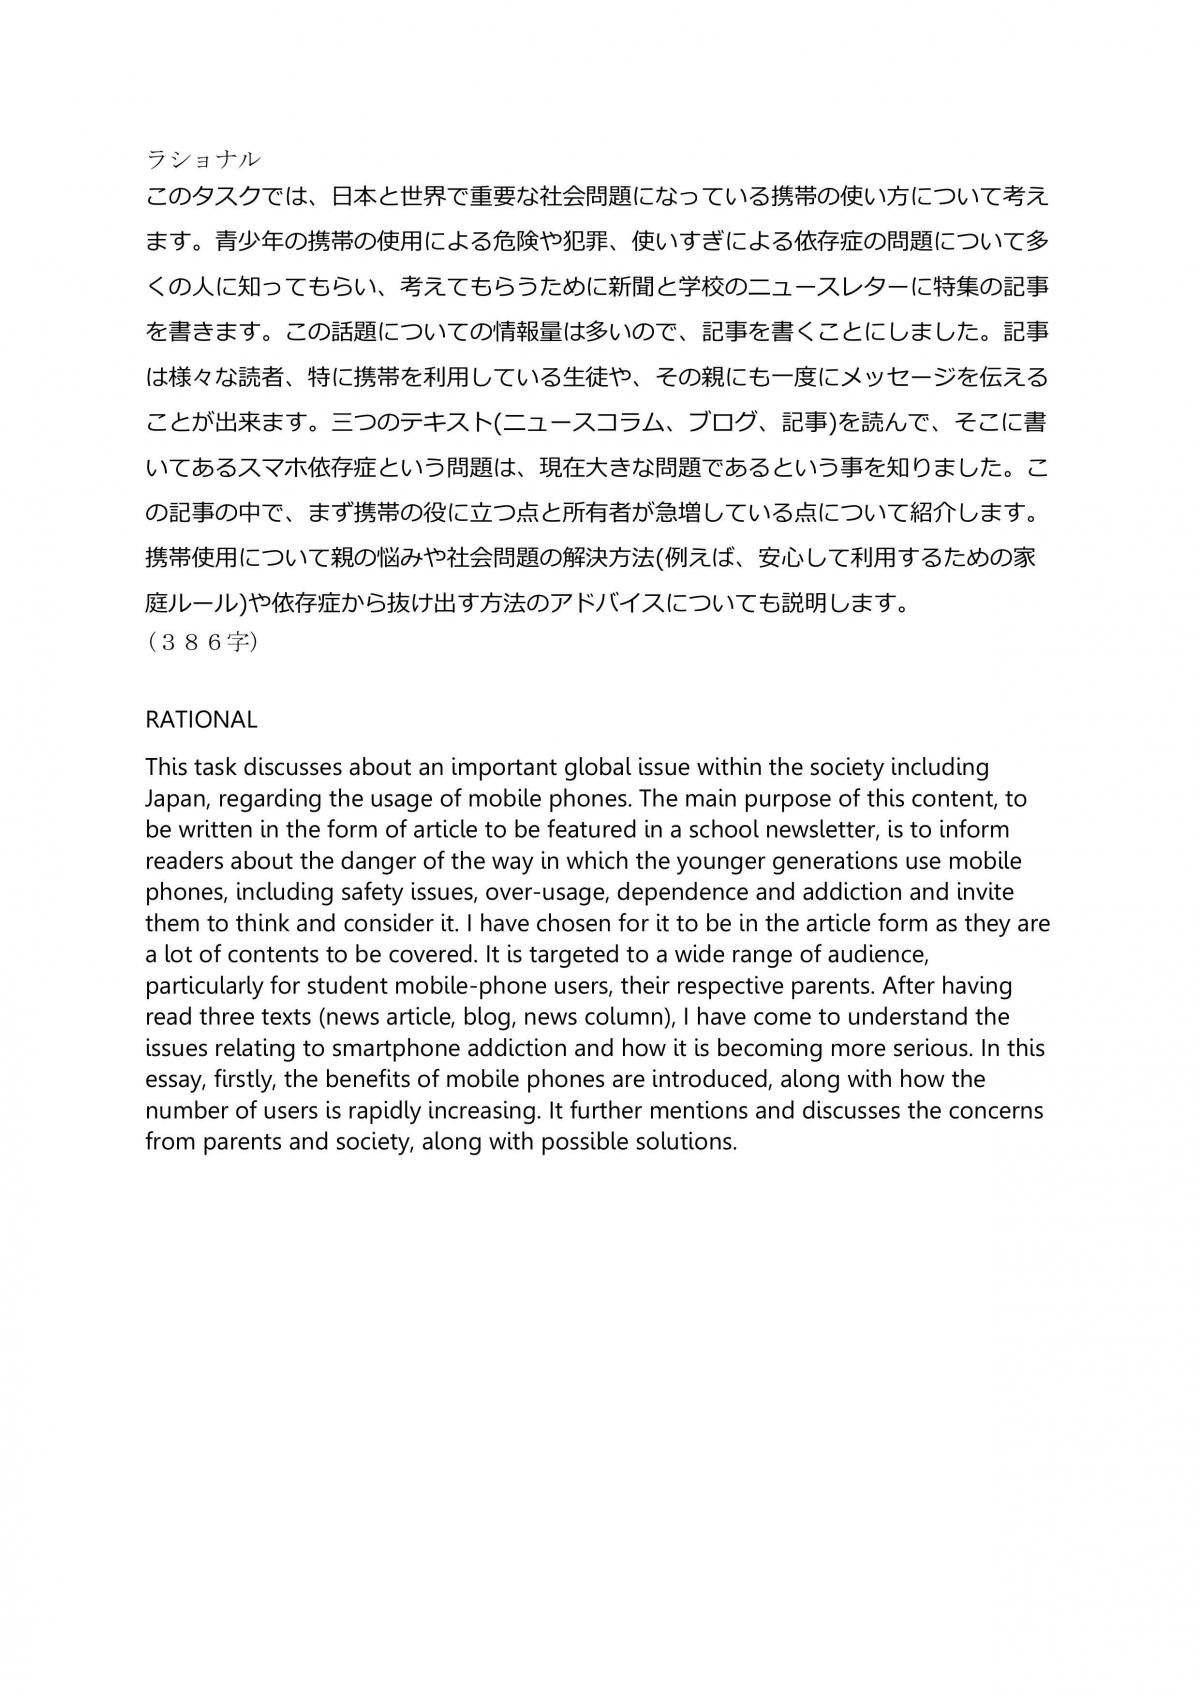 ap japanese essay examples